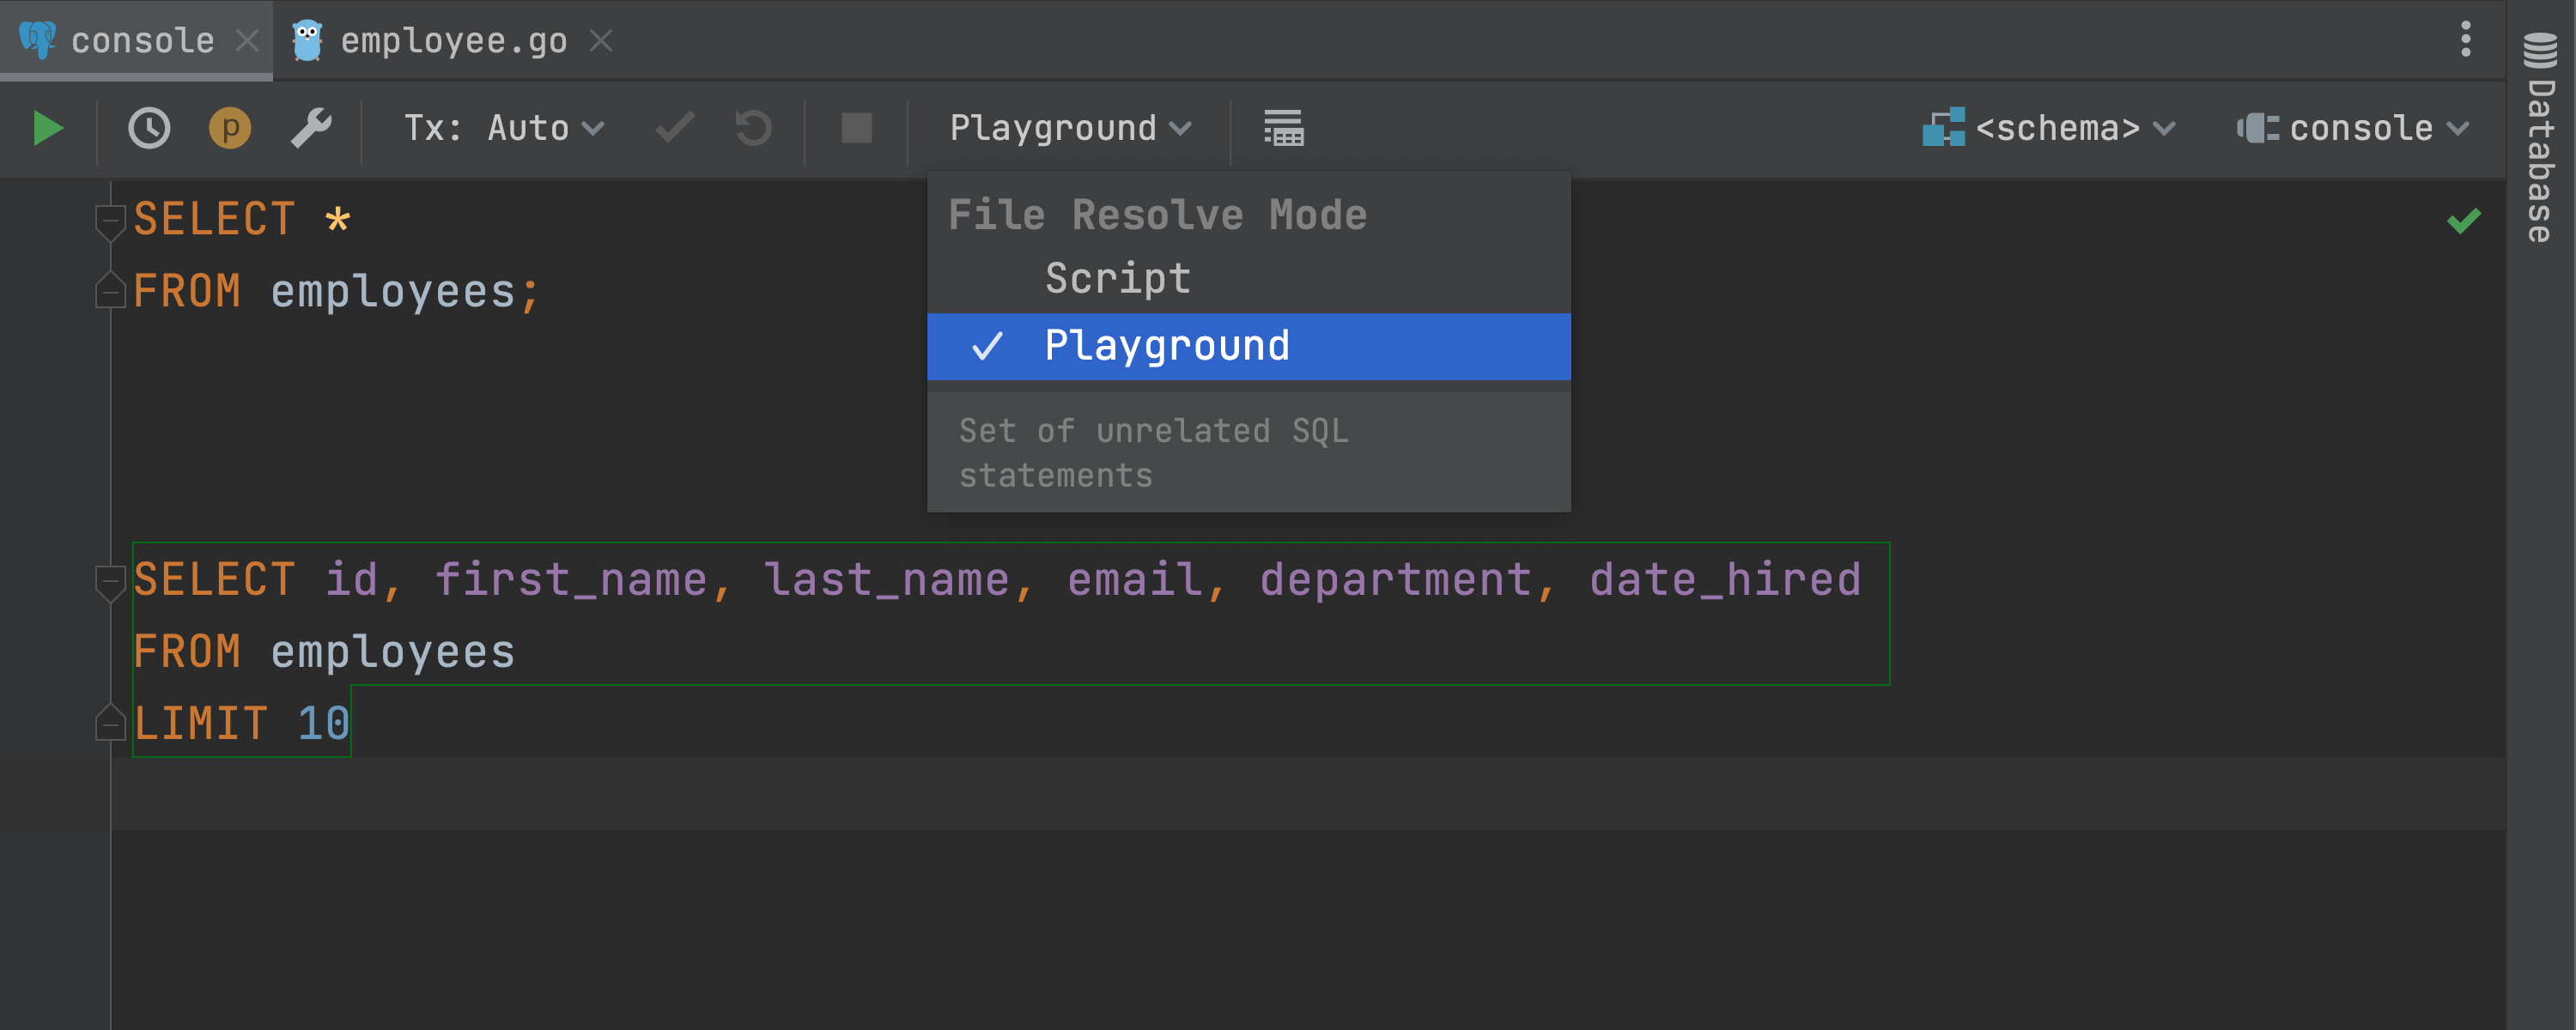 The Script and Playground resolve modes